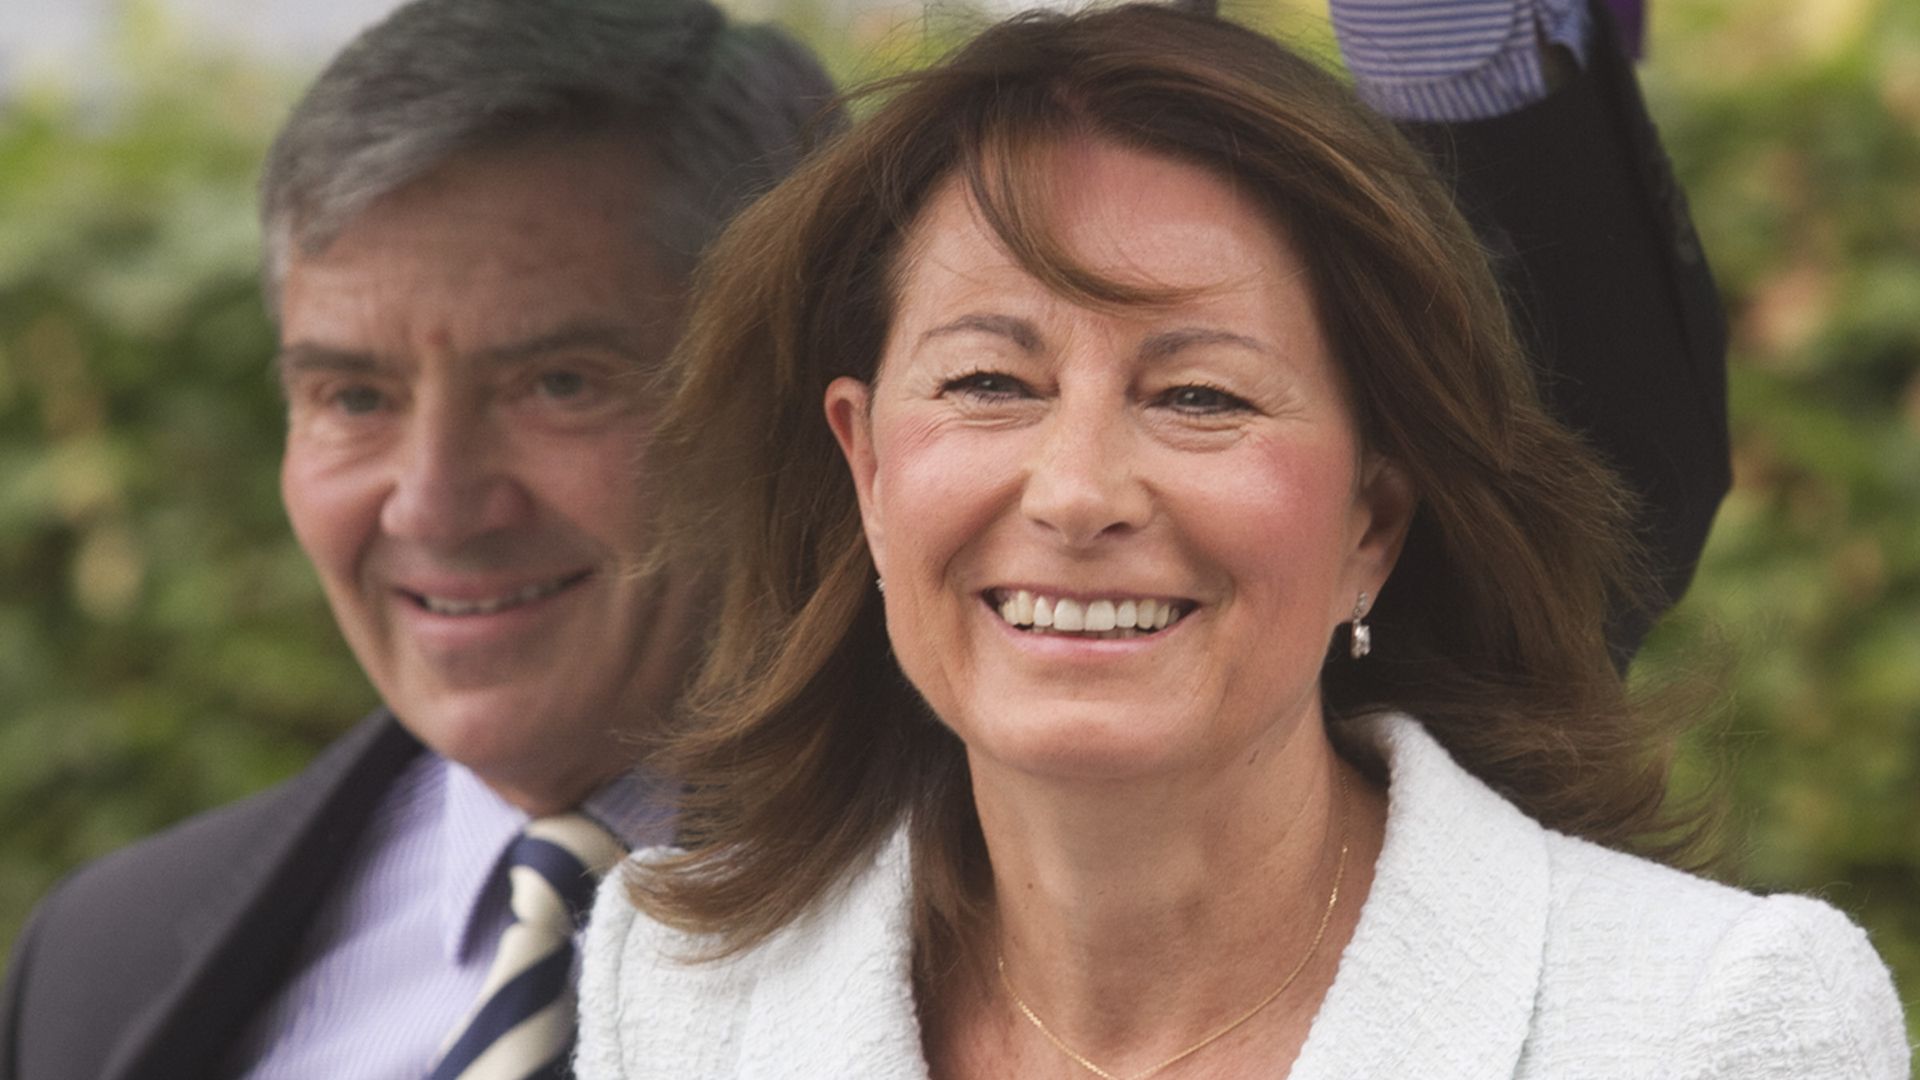 Carole Middleton in a white coat under an umbrella with Michael